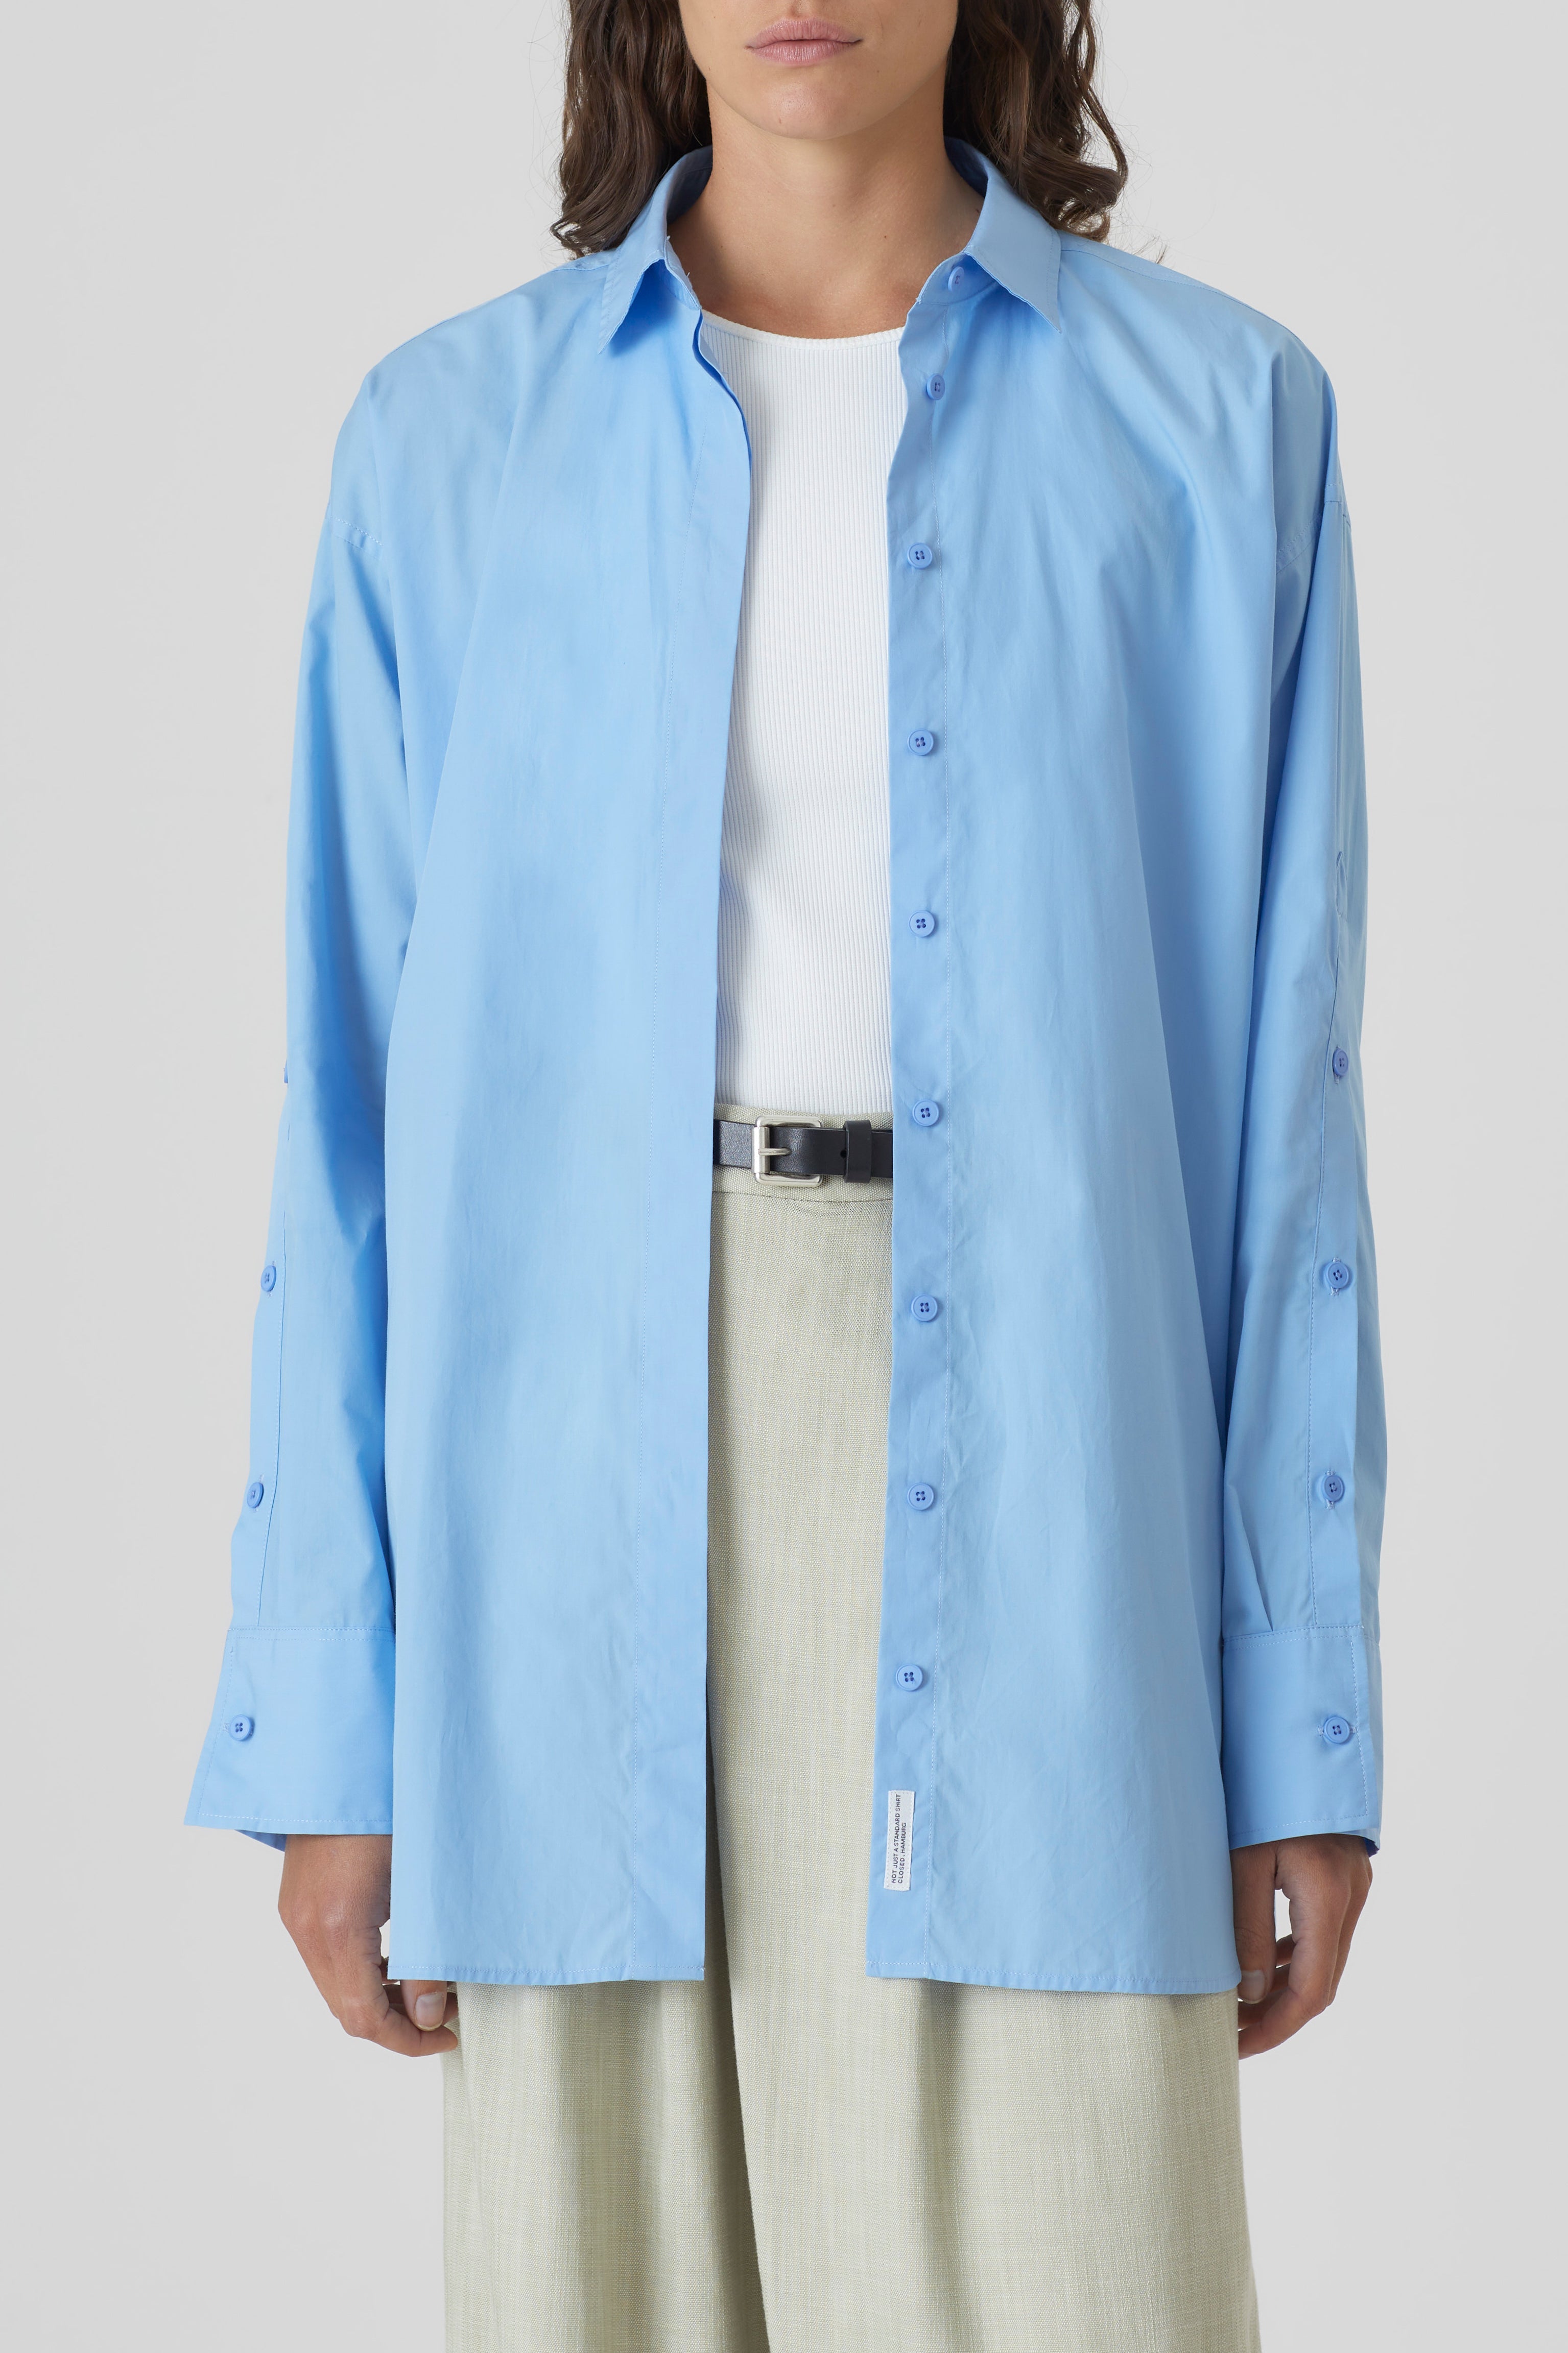 CLOSED-OUTLET-SALE-STYLE-NAME-PLACKET-DETAIL-SHIRT-SHIRTS-BLOUSES-Shirts-ARCHIVE-COLLECTION.jpg